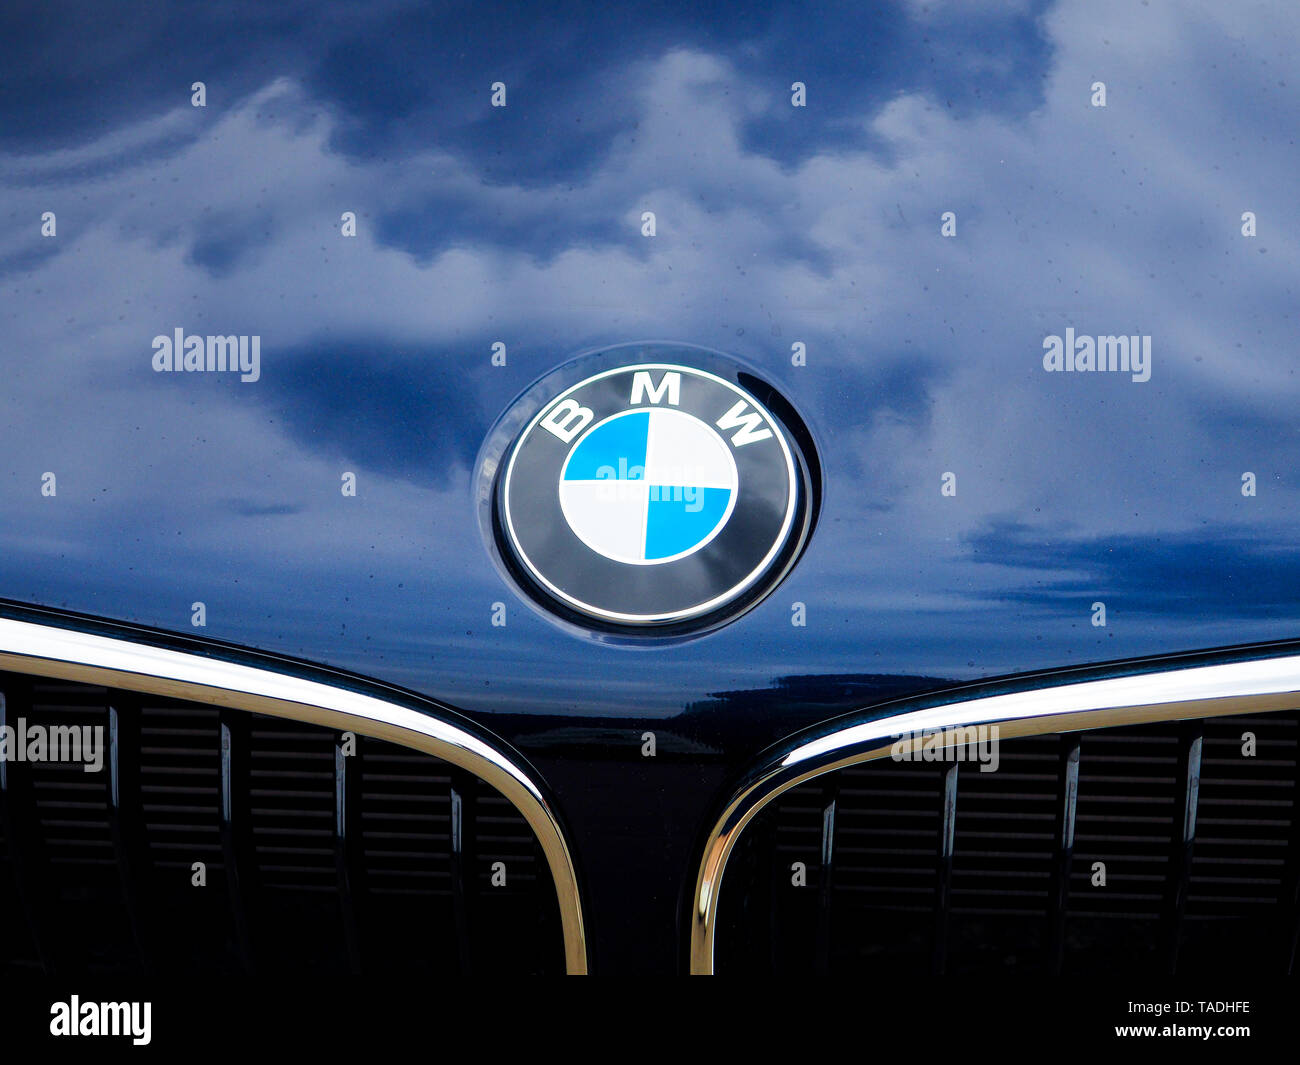 17 Firmenlogo Bmw Photos & High Res Pictures - Getty Images